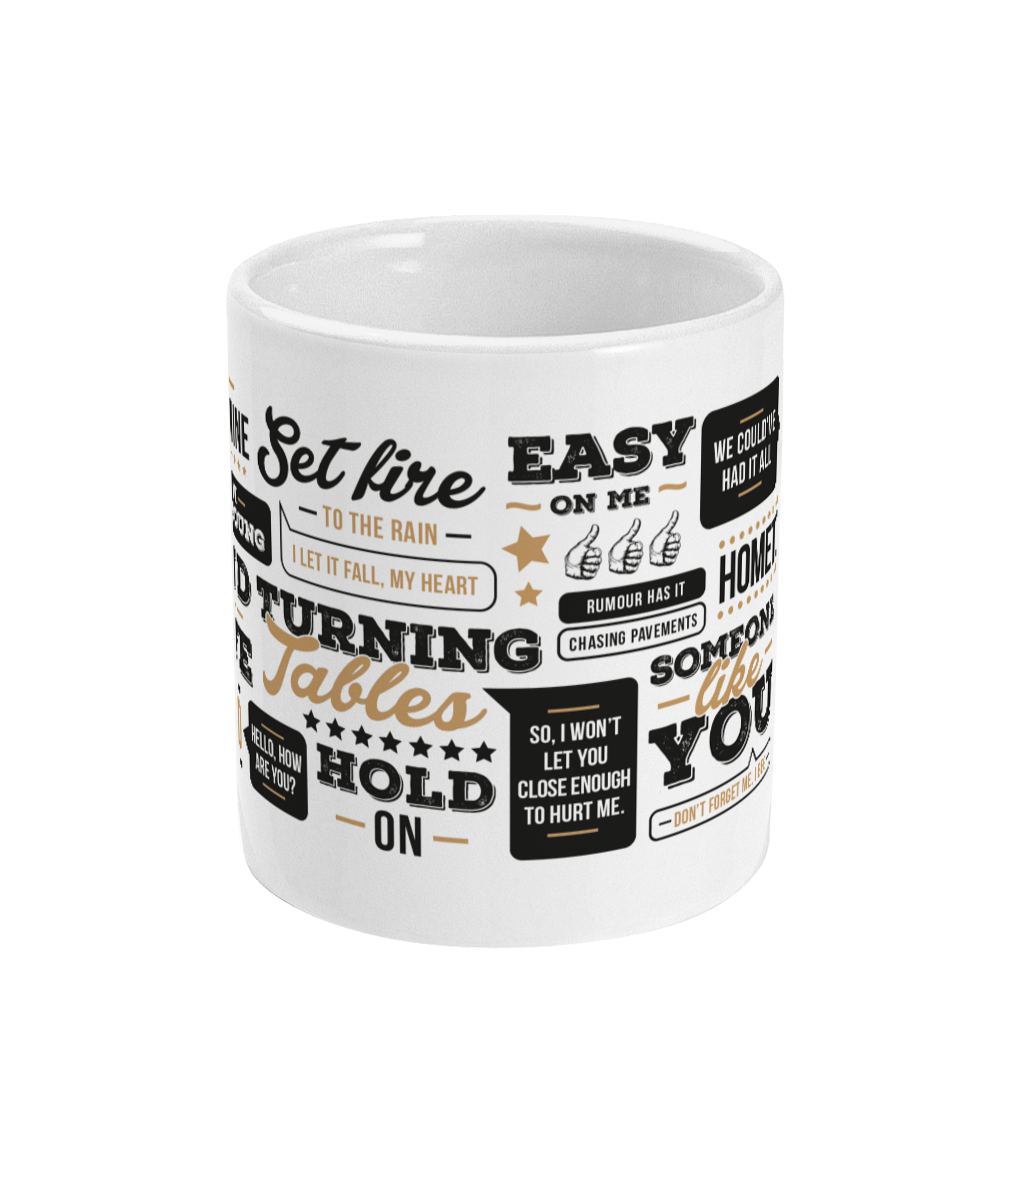 Adele fan mug featuring popular lines from songs